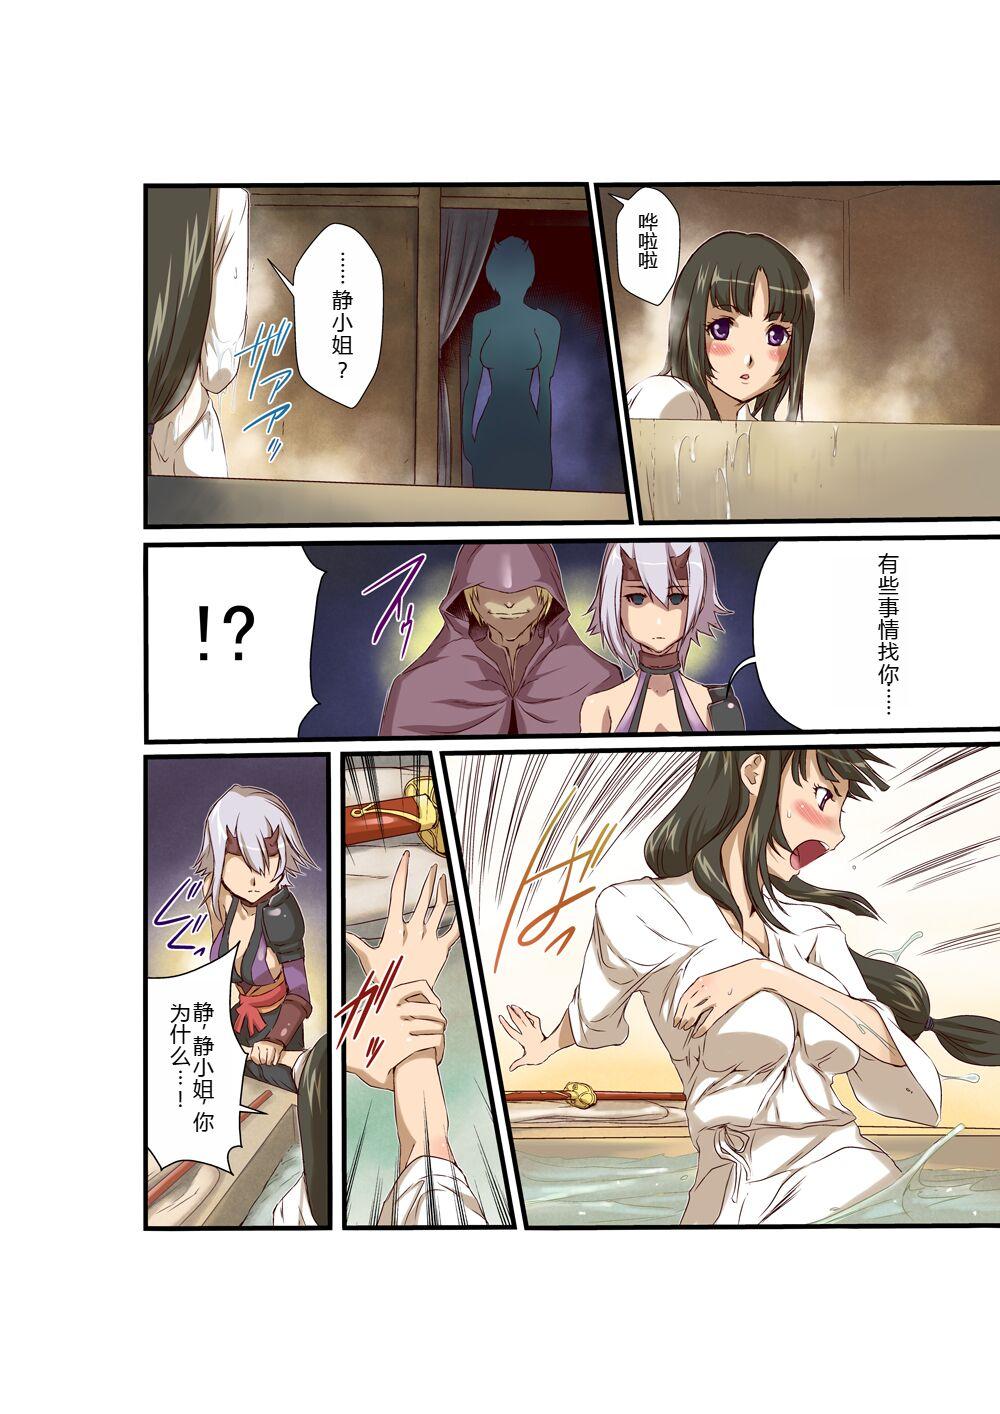 Ftv Girls Queen's *lade Mind-control Manga - Queens blade Cum In Mouth - Page 6